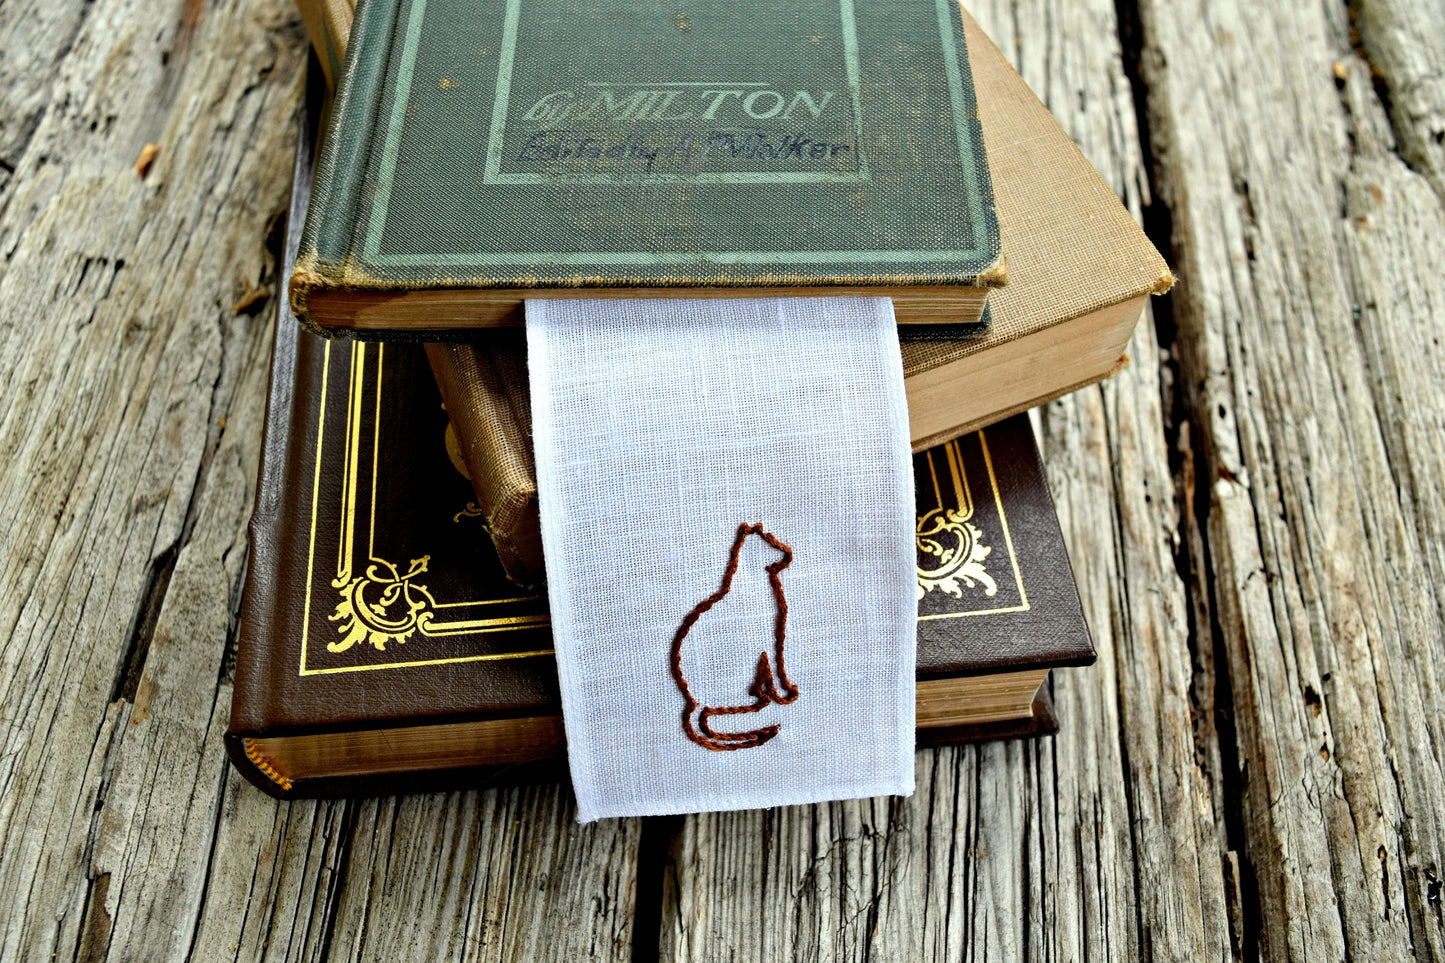 Cat silhouette stitched onto bookmark with volumes of poetry